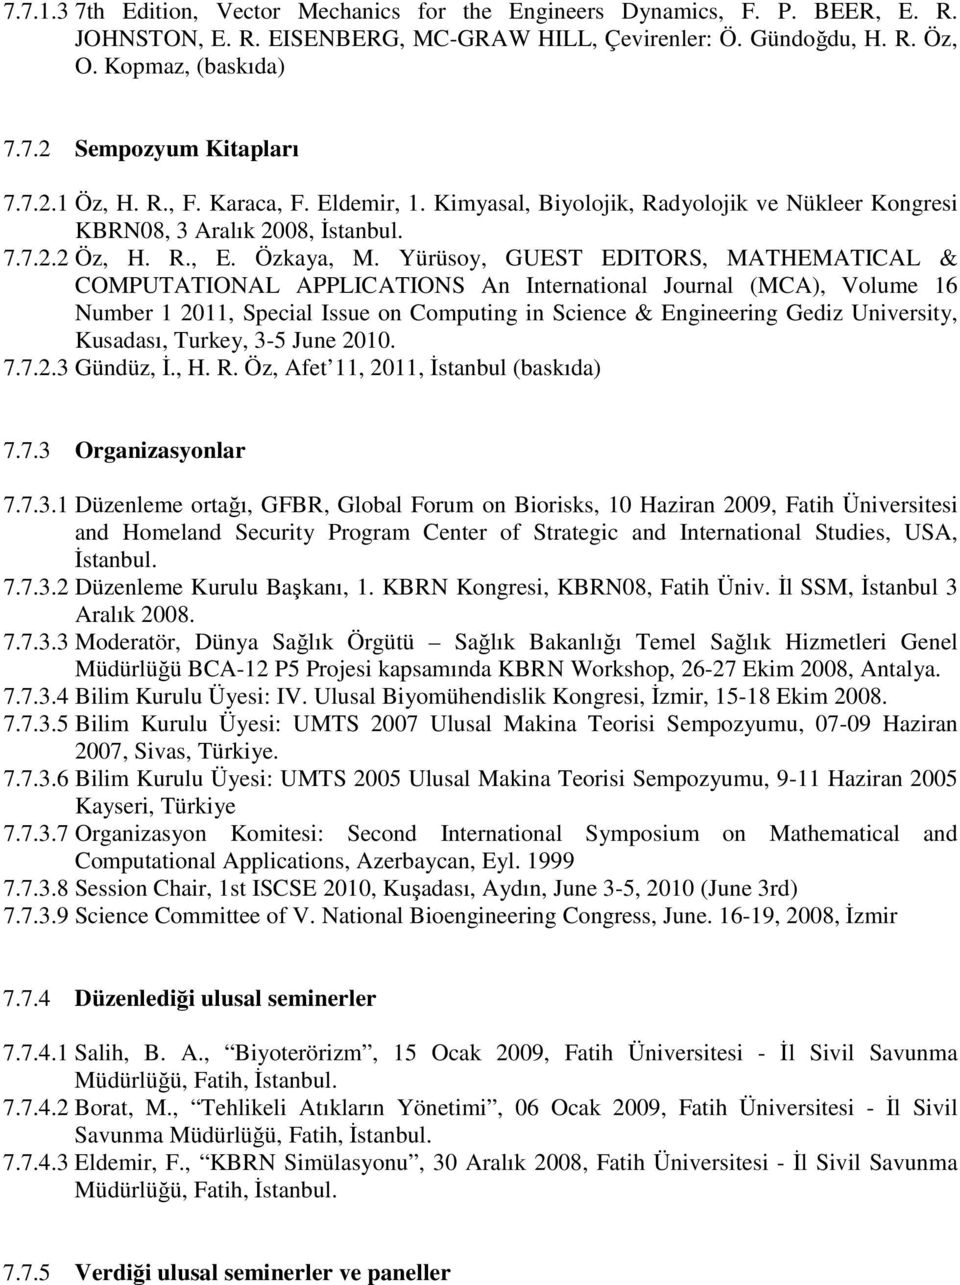 Yürüsoy, GUEST EDITORS, MATHEMATICAL & COMPUTATIONAL APPLICATIONS An International Journal (MCA), Volume 16 Number 1 2011, Special Issue on Computing in Science & Engineering Gediz University,